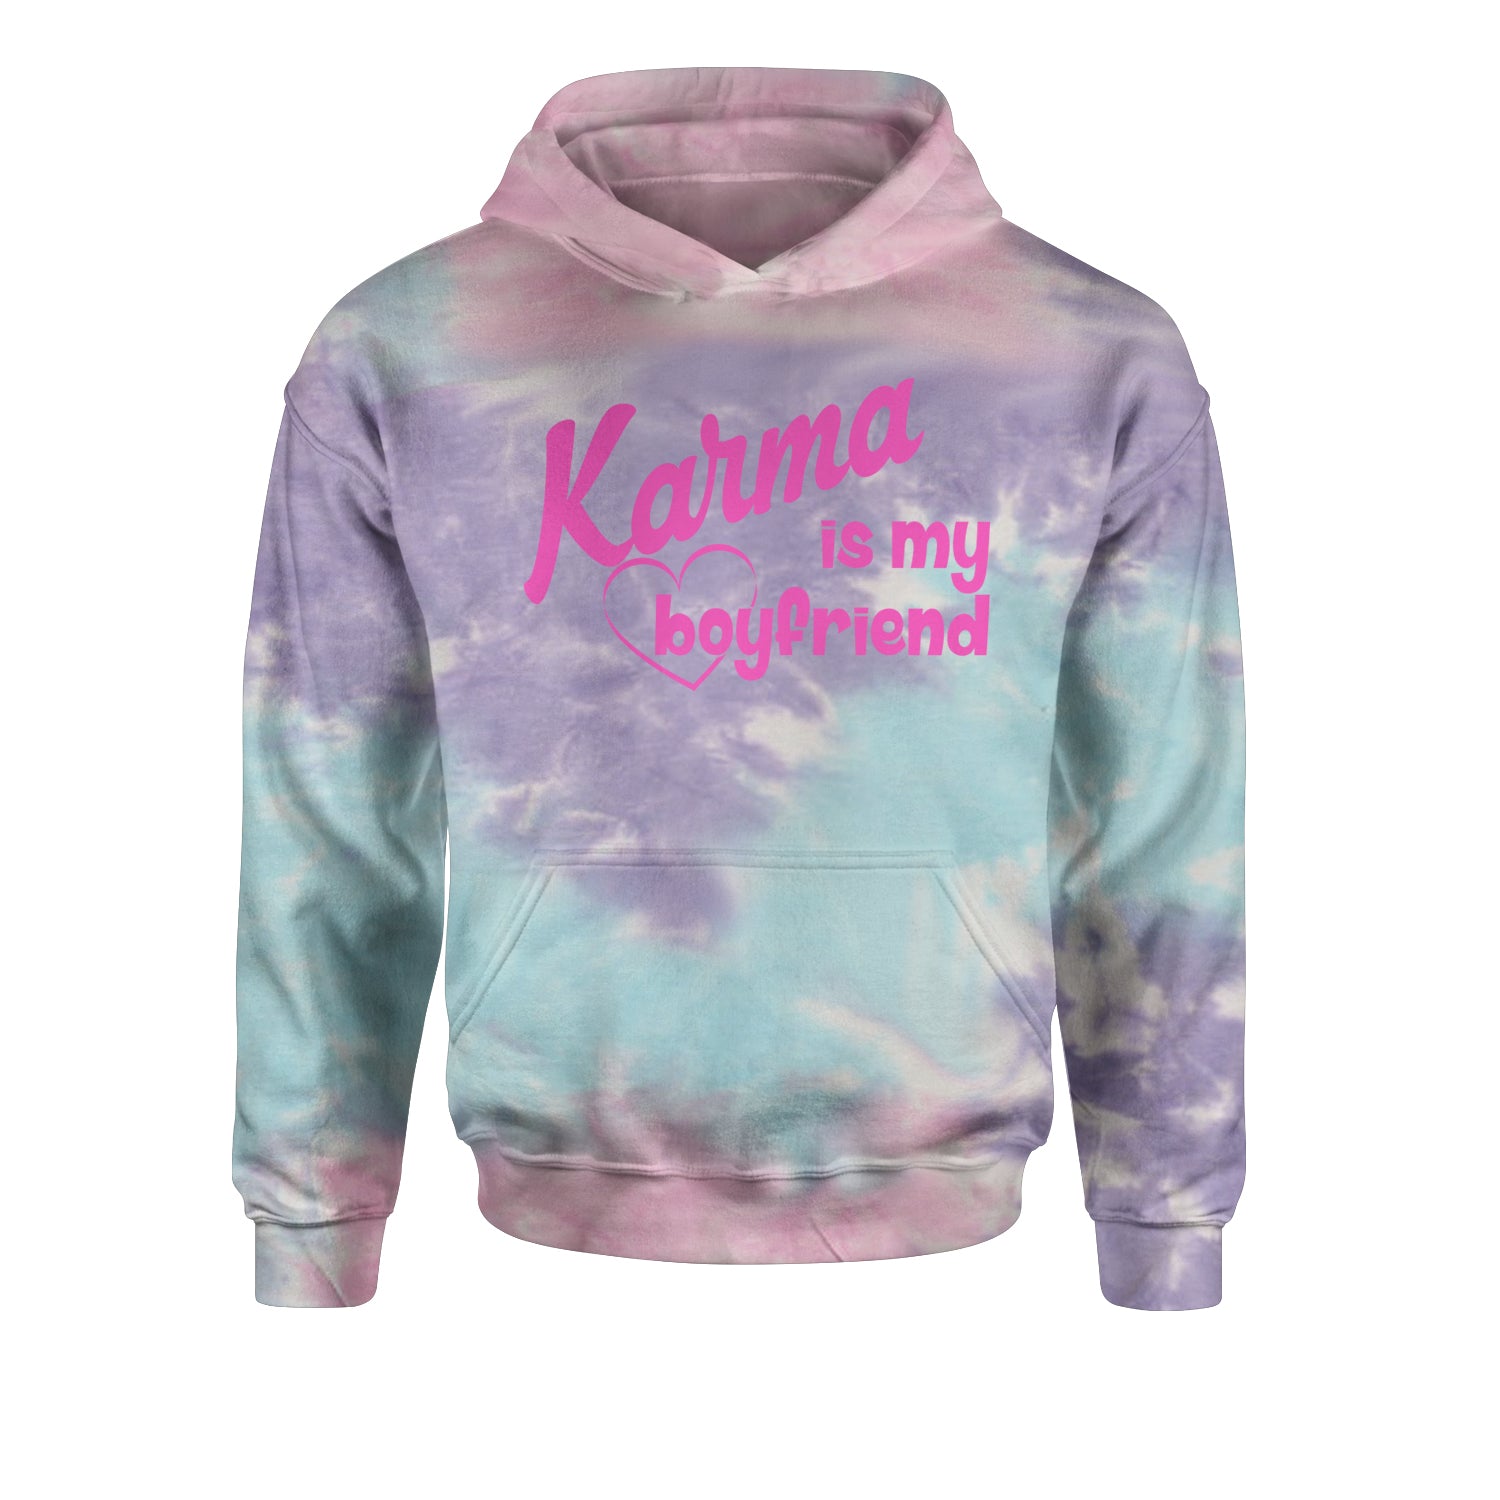 Karma Is My Boyfriend Youth-Sized Hoodie nation, taylornation by Expression Tees